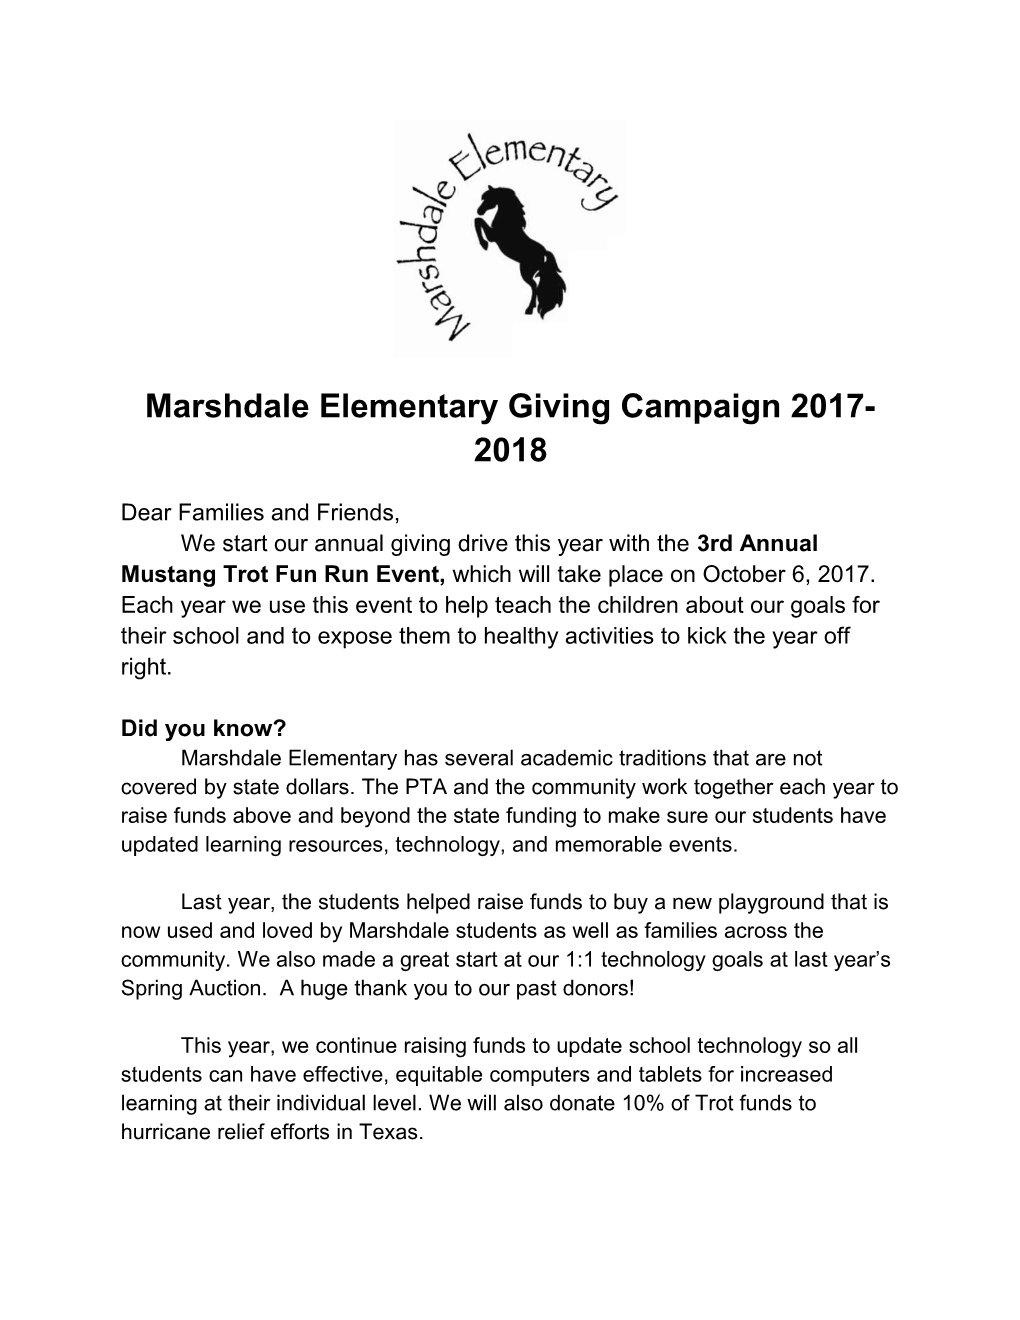 Marshdale Elementary Giving Campaign 2017-2018